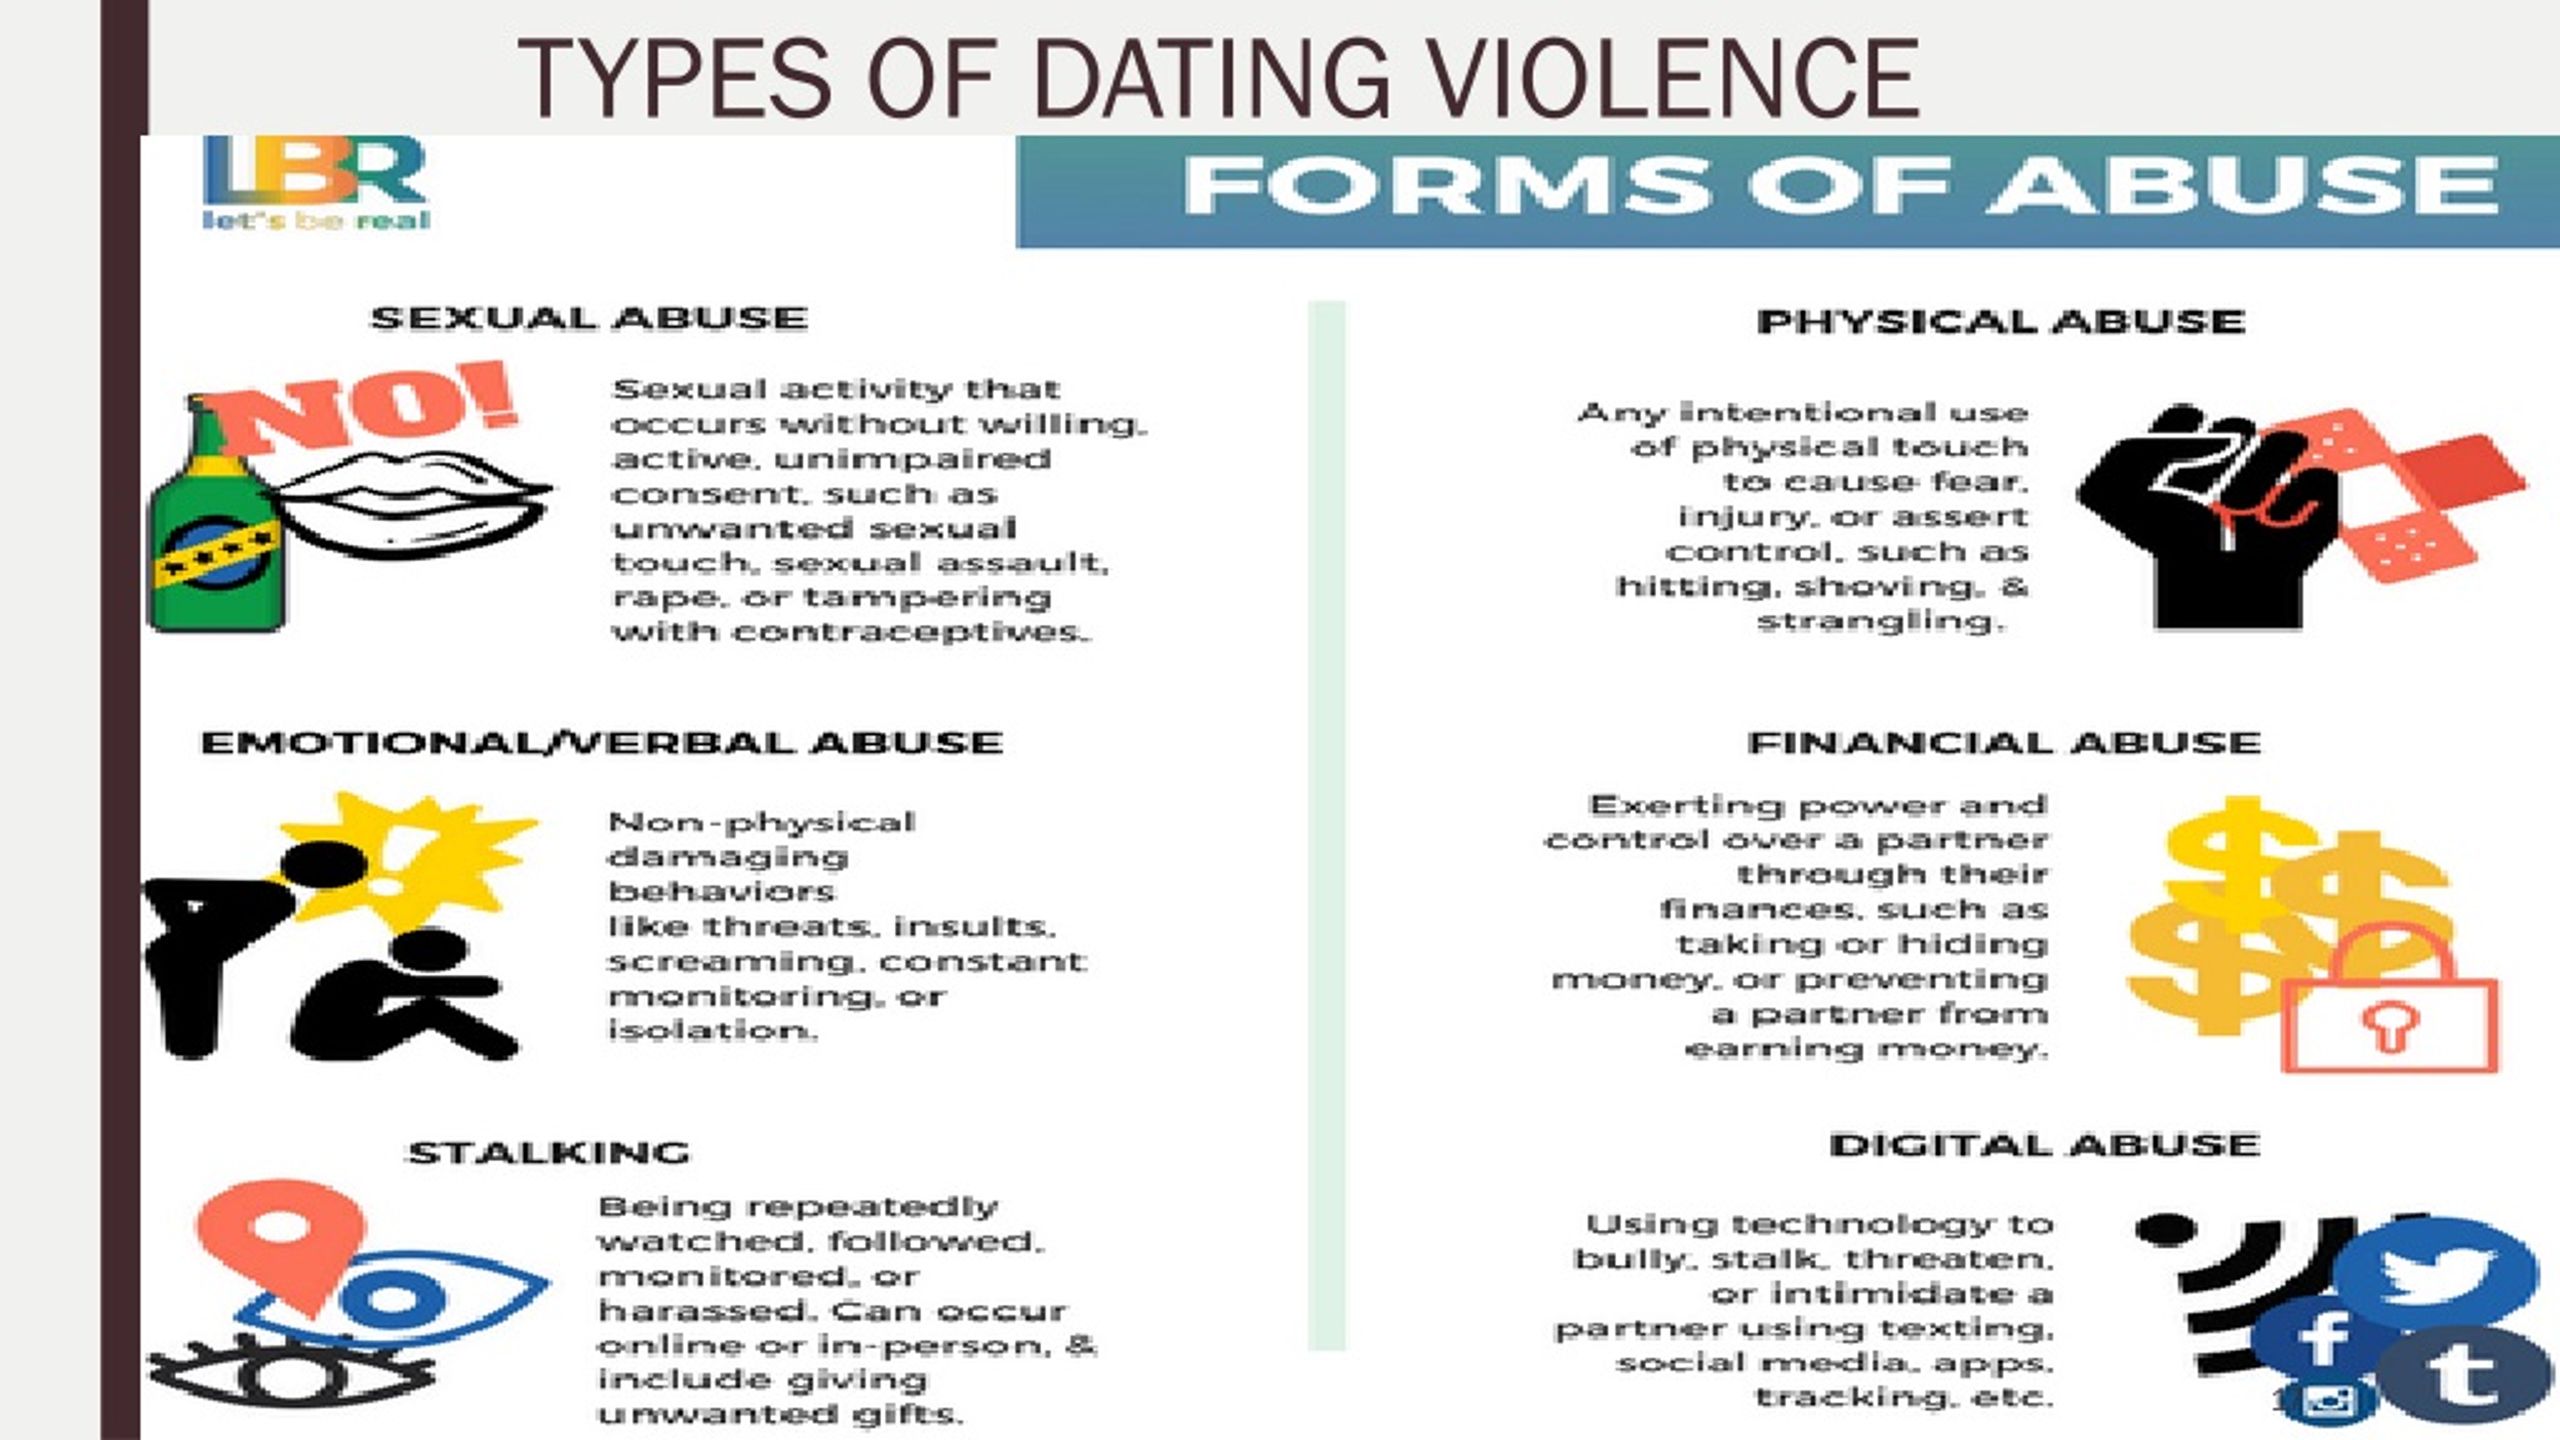 3 types of dating violence